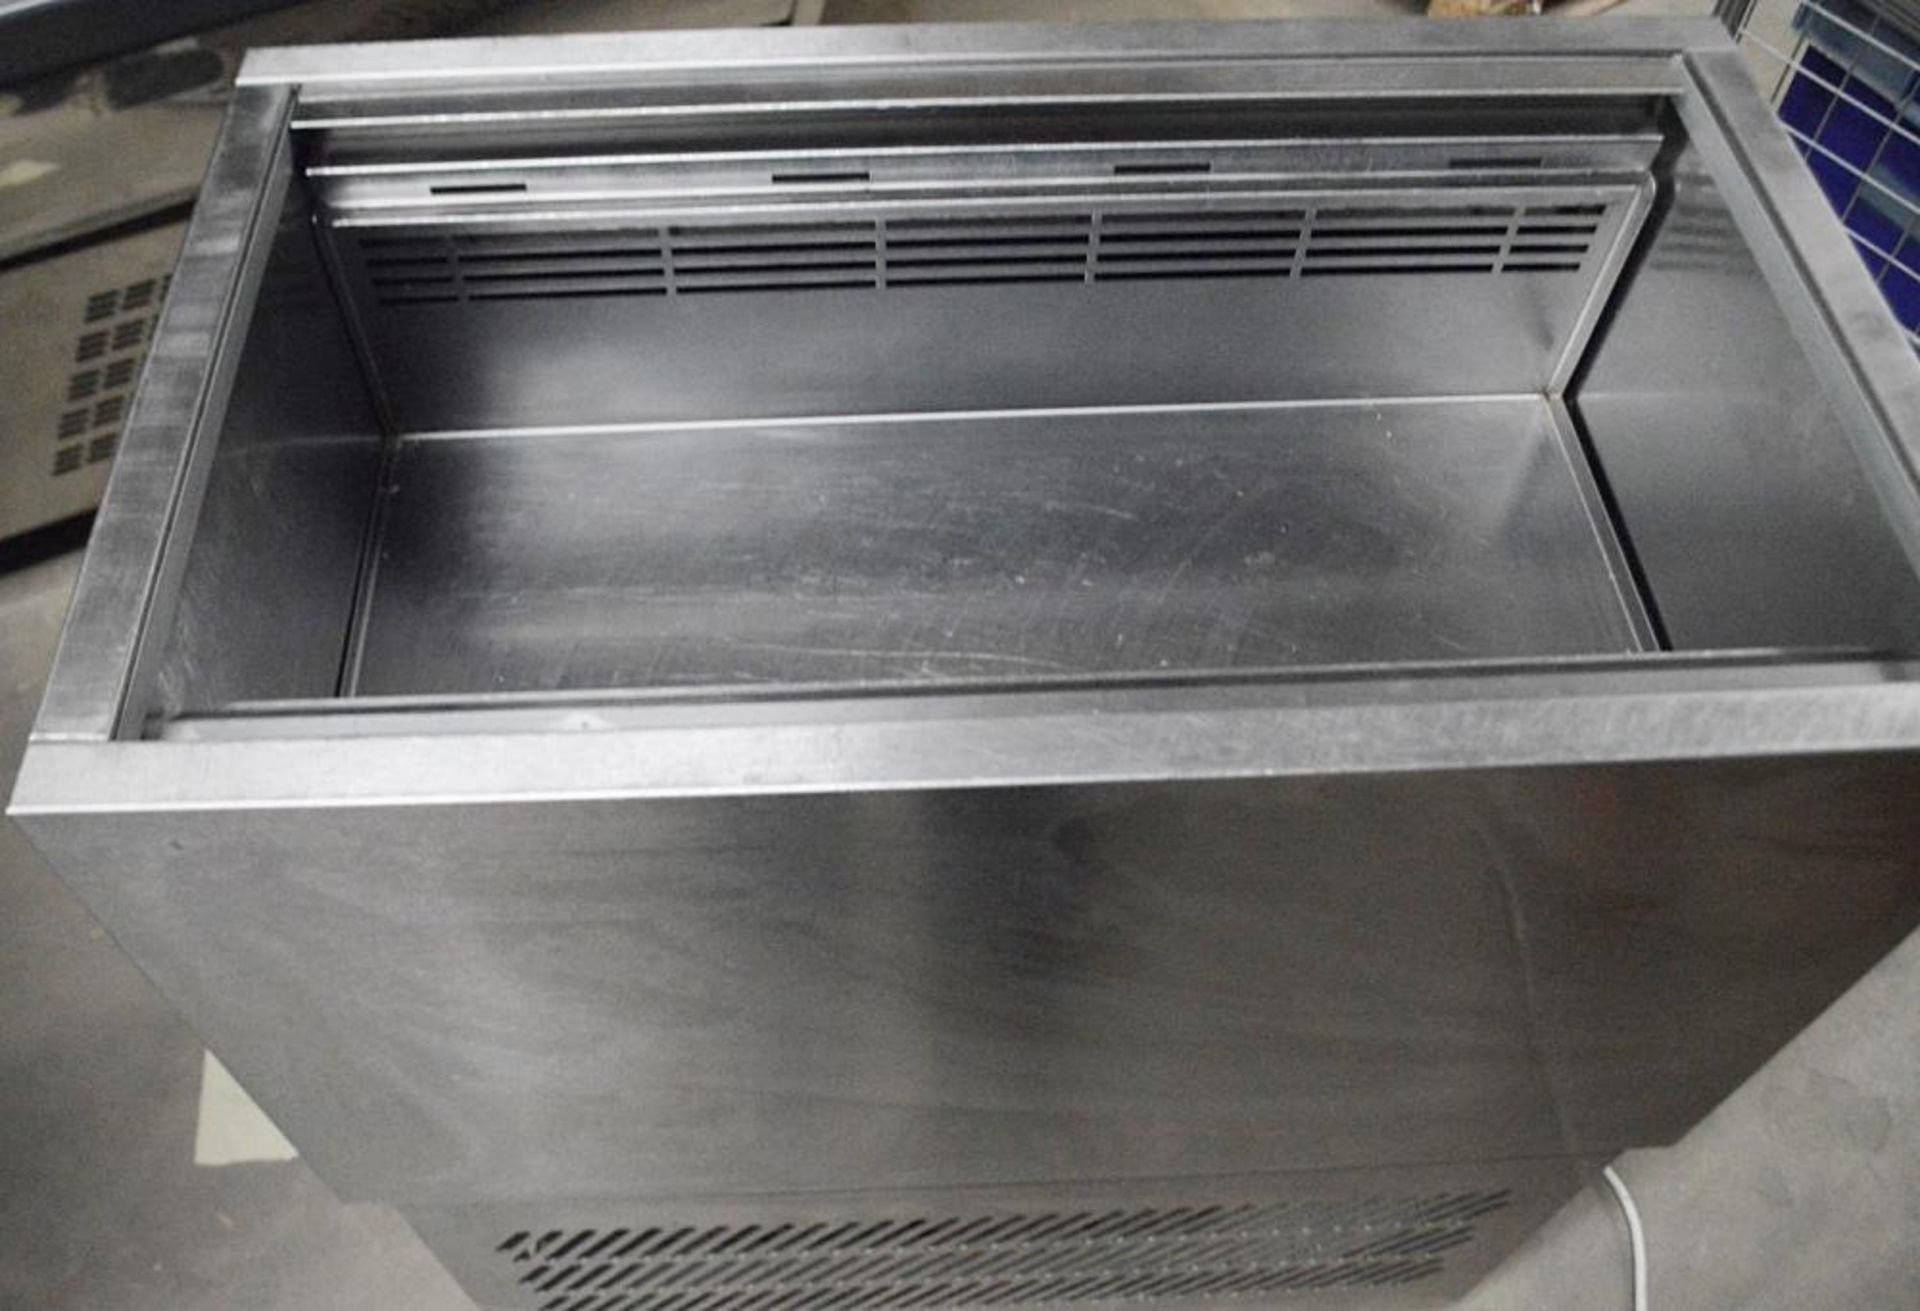 1 x Williams PW4/R290 Refrigerated Prep Well With 4 x Gastro Pans - Dimensions: H88 x W77 x D45cm - - Image 3 of 8